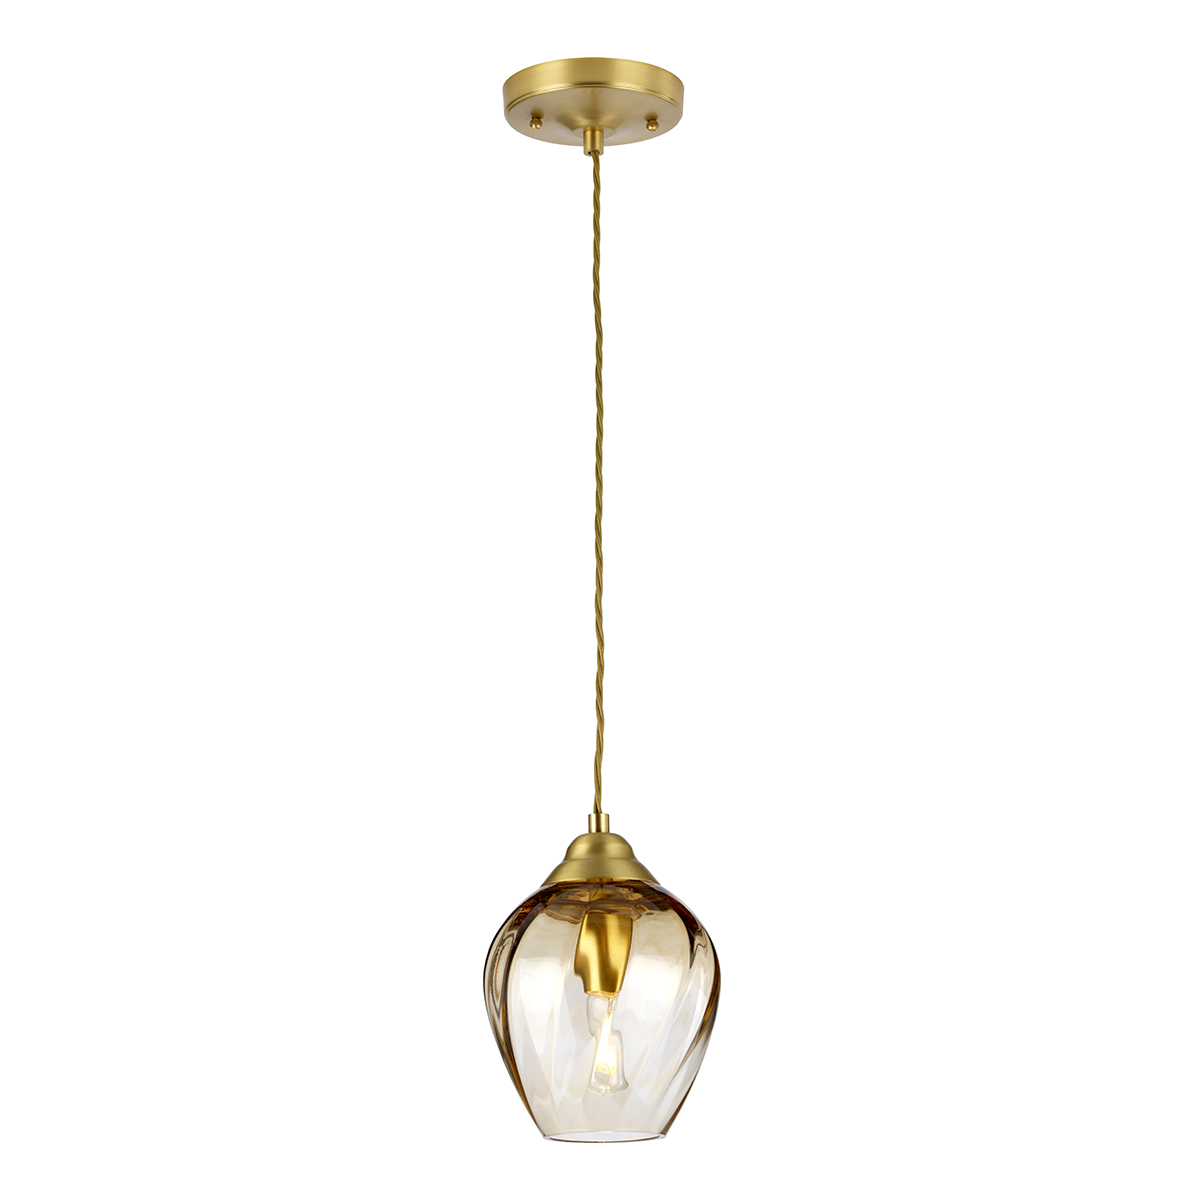 Image of Elstead TIBER-P-AMBER Tiber 1 Light Ceiling Pendant In Brushed Brass Finish With Amber Glass